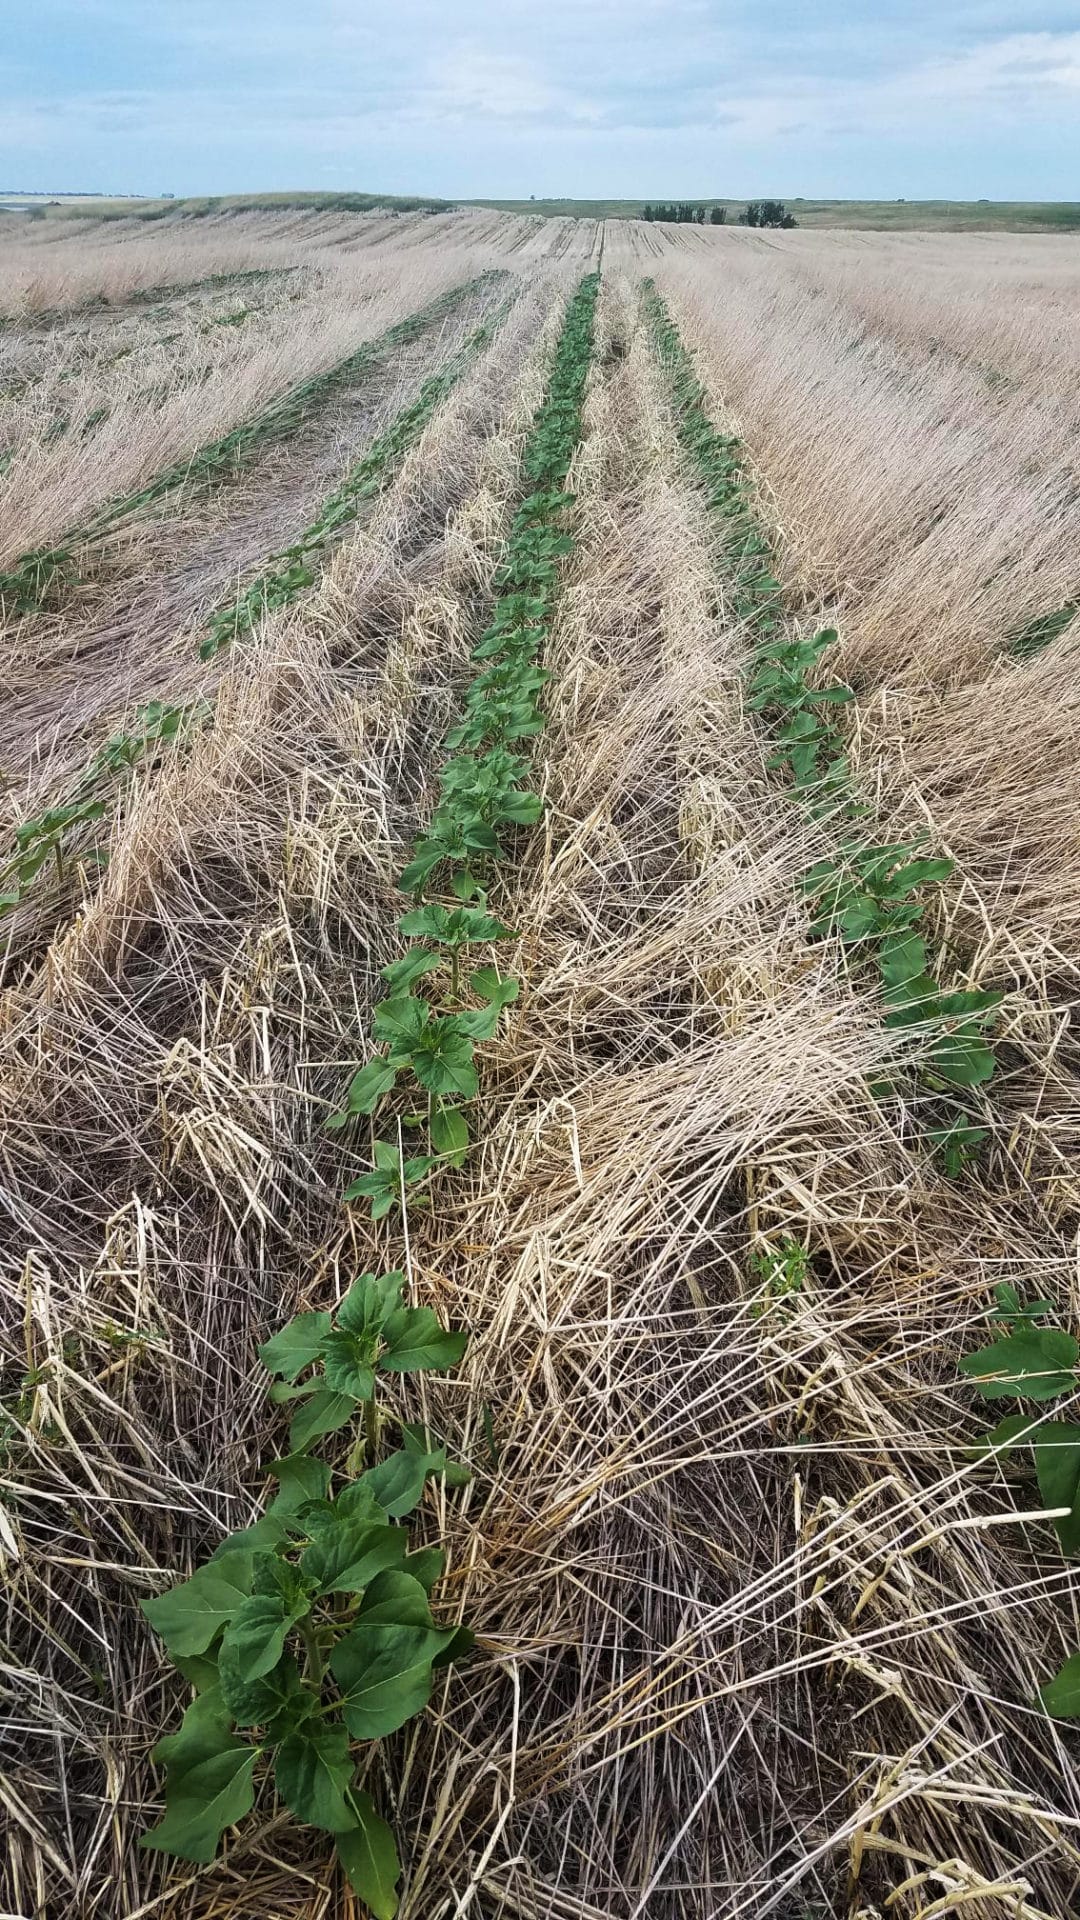 “This photo shows sunflowers growing in last years stripped off winter wheat stubble. You can also see last fall’s barley, sweet clover and radish cover residue.” – Brandon Bock